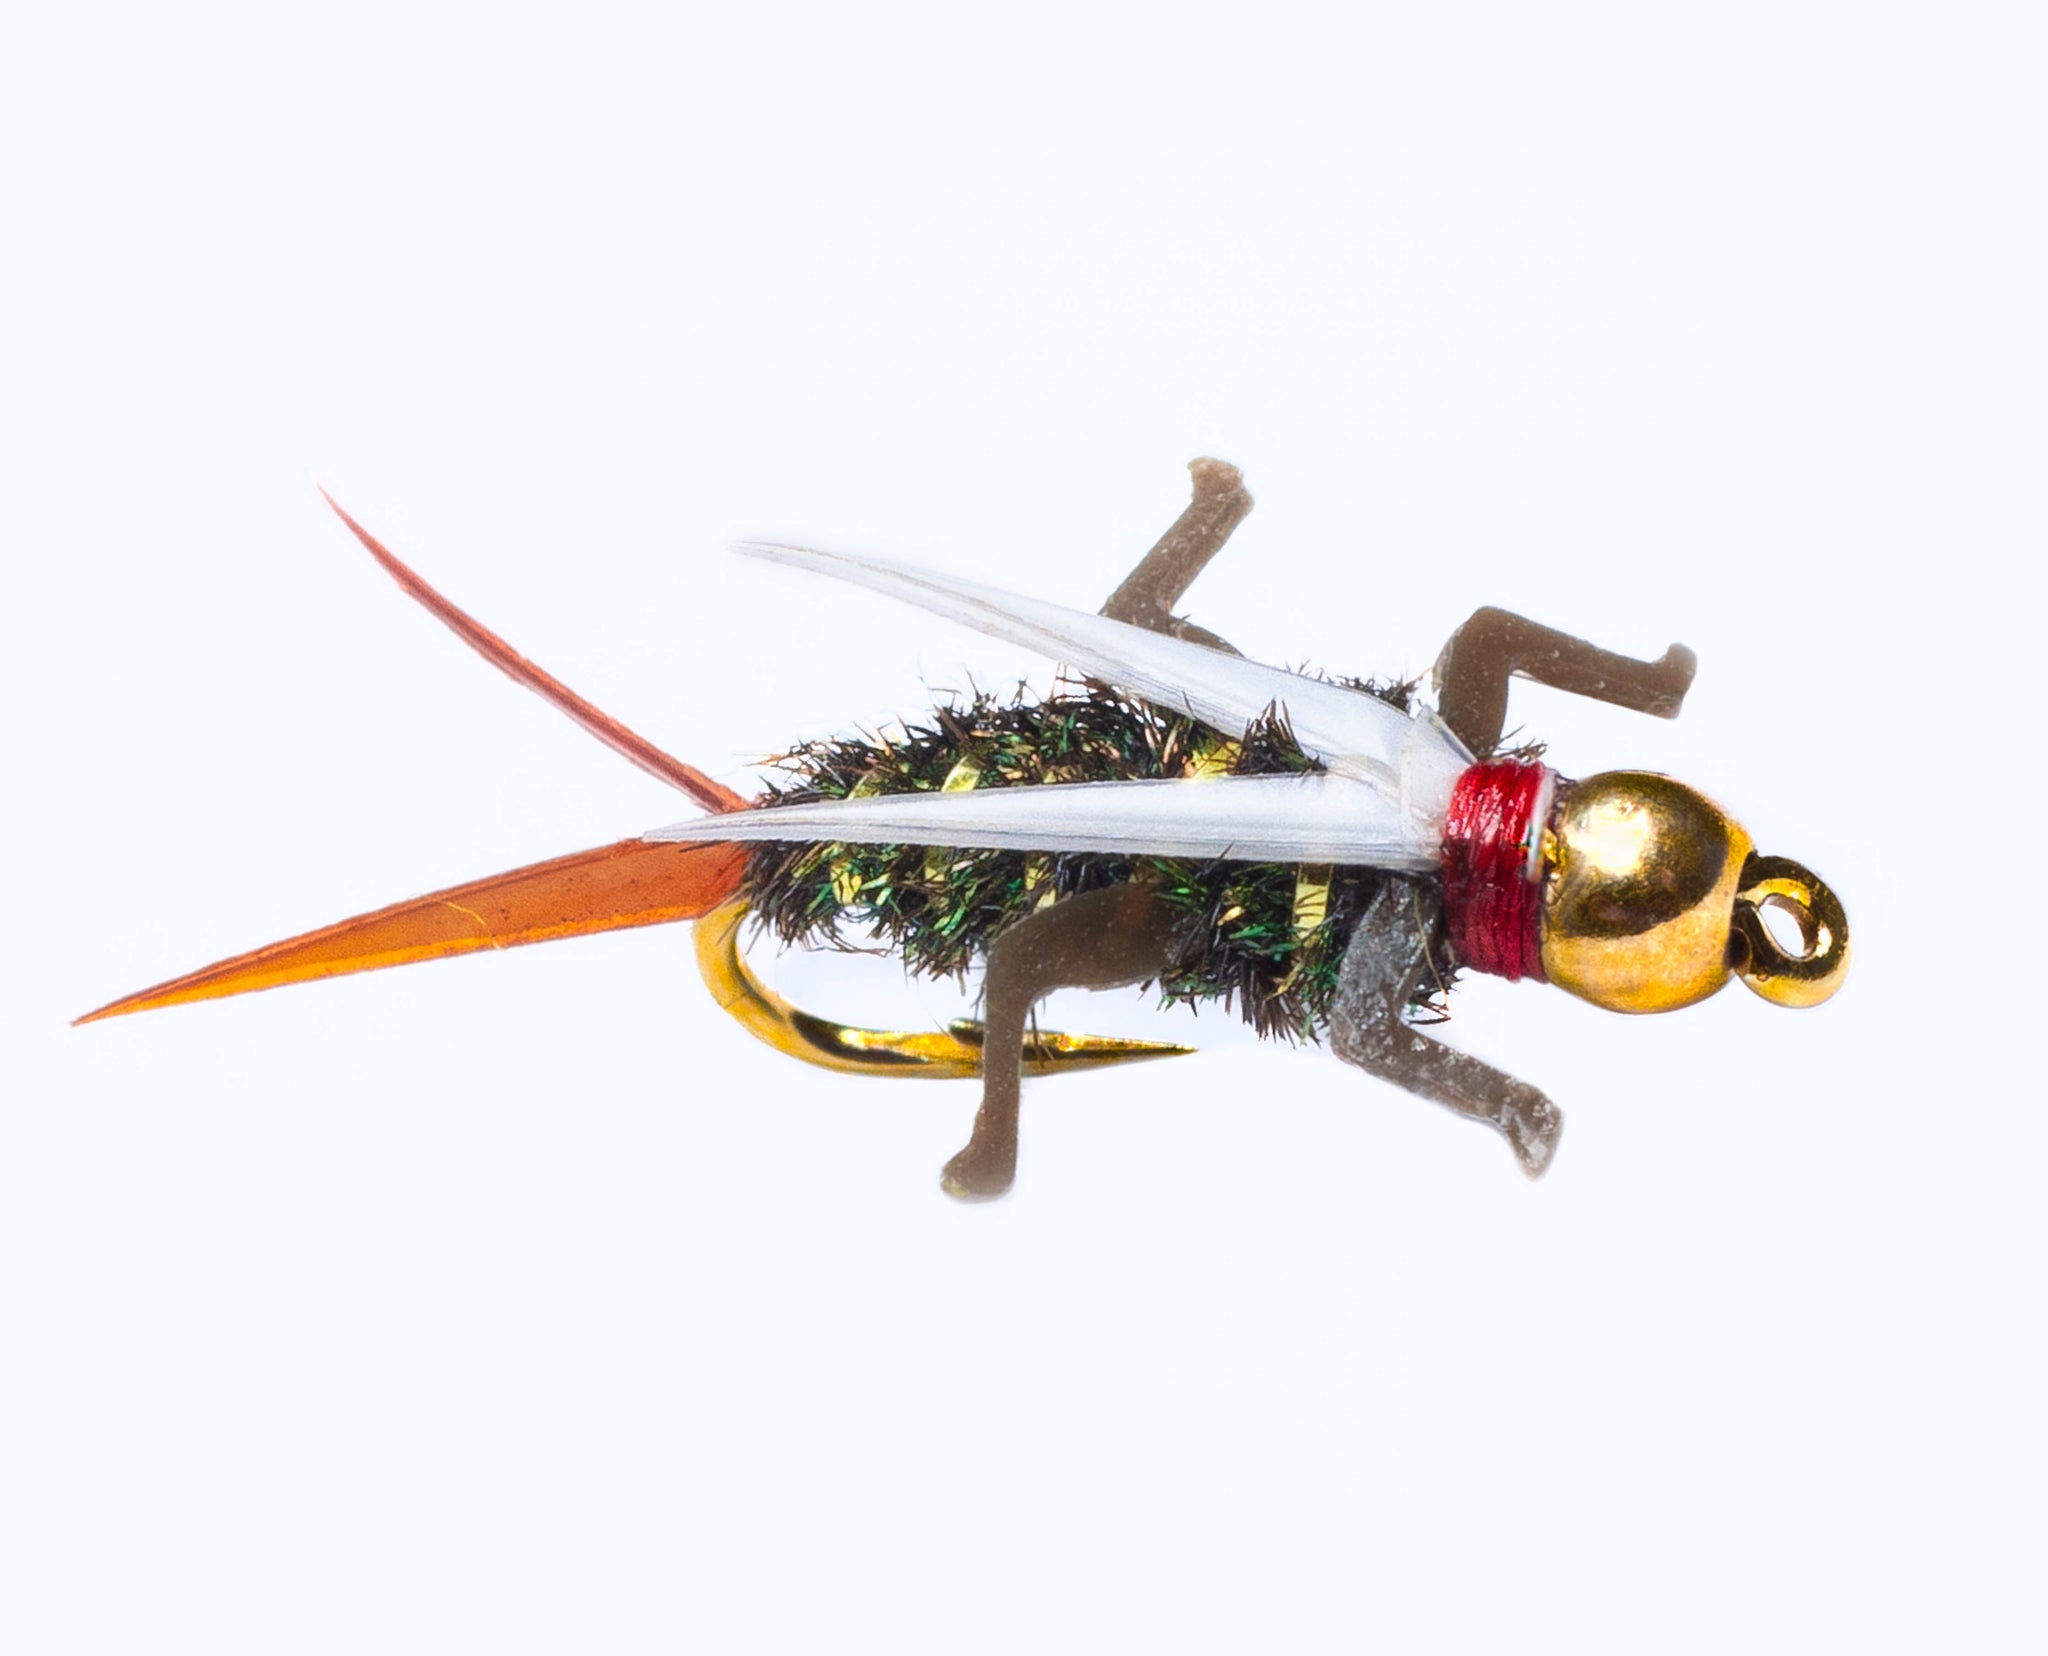 Lively Legz Barbed Nymphs – Lively Legz Fly Fishing